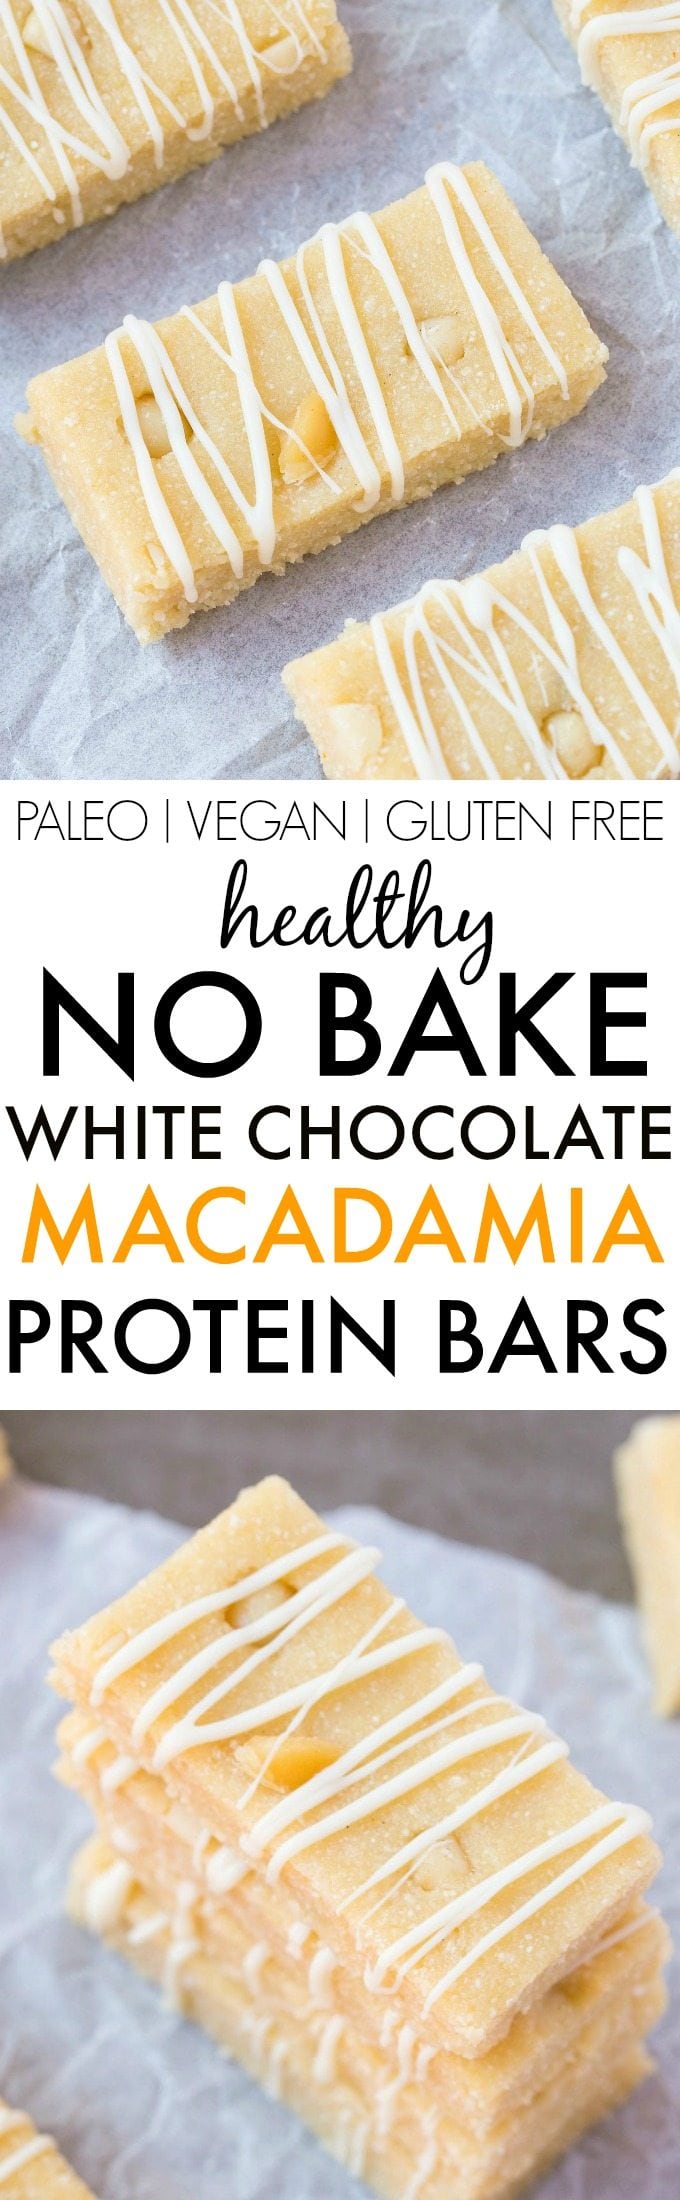 Healthy No Bake White Chocolate Macadamia Nut Protein Bars- Quick, easy and simple no cook recipe which tastes like dessert (and better than store bought!)- Portable, fudgy and ready in under 10 minutes! {vegan, gluten free, paleo recipe}- thebigmansworld.com